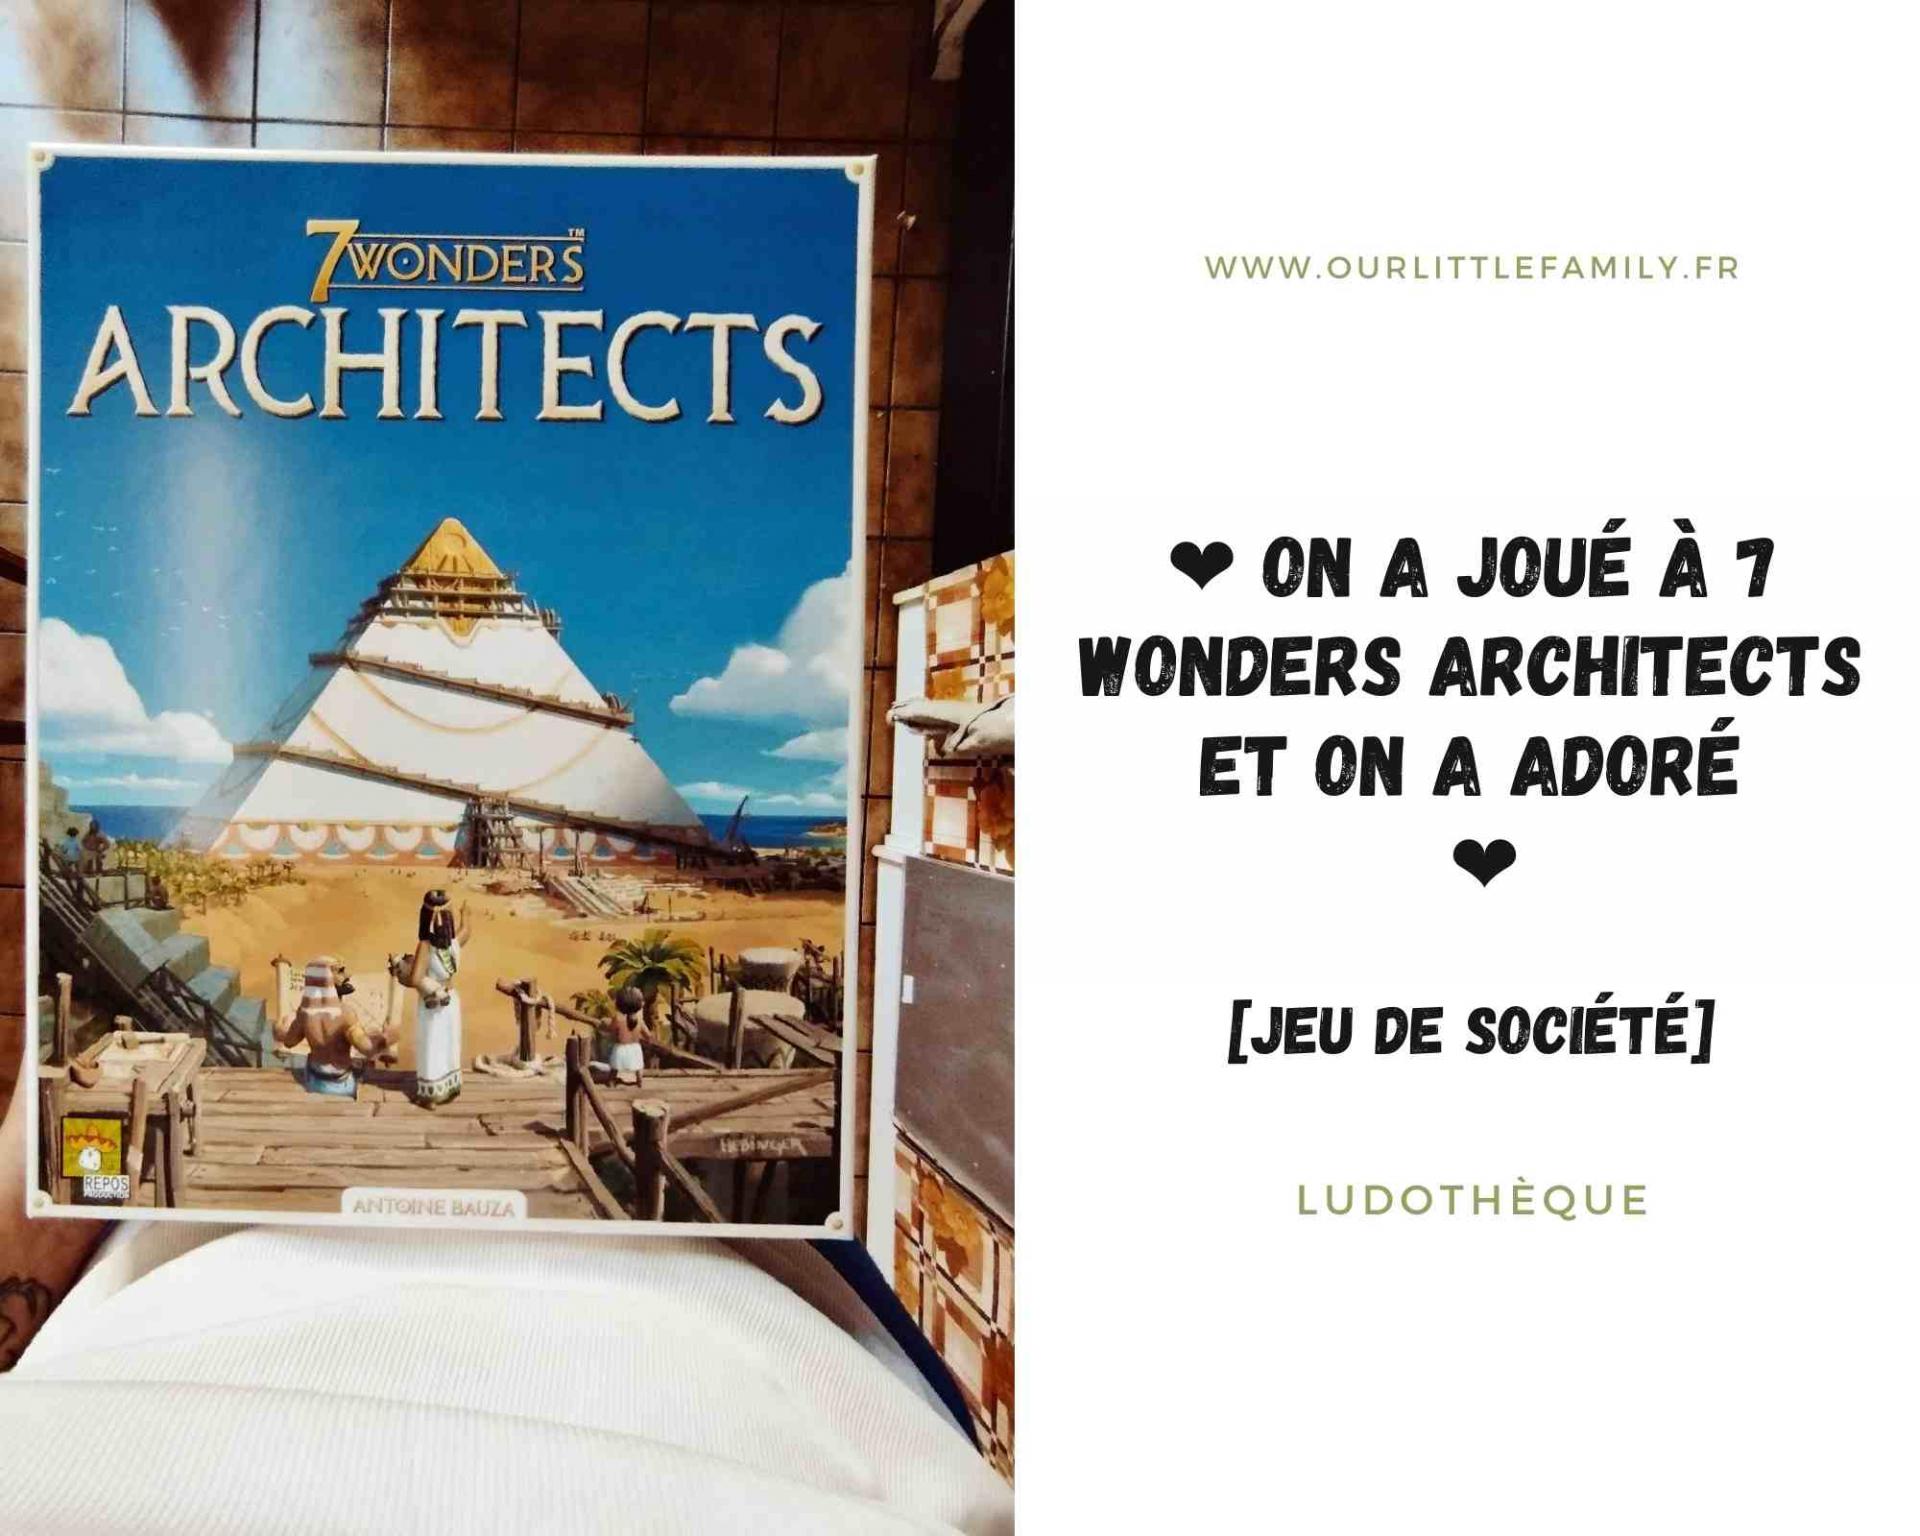 On a joue a 7 wonders architects et on a adore